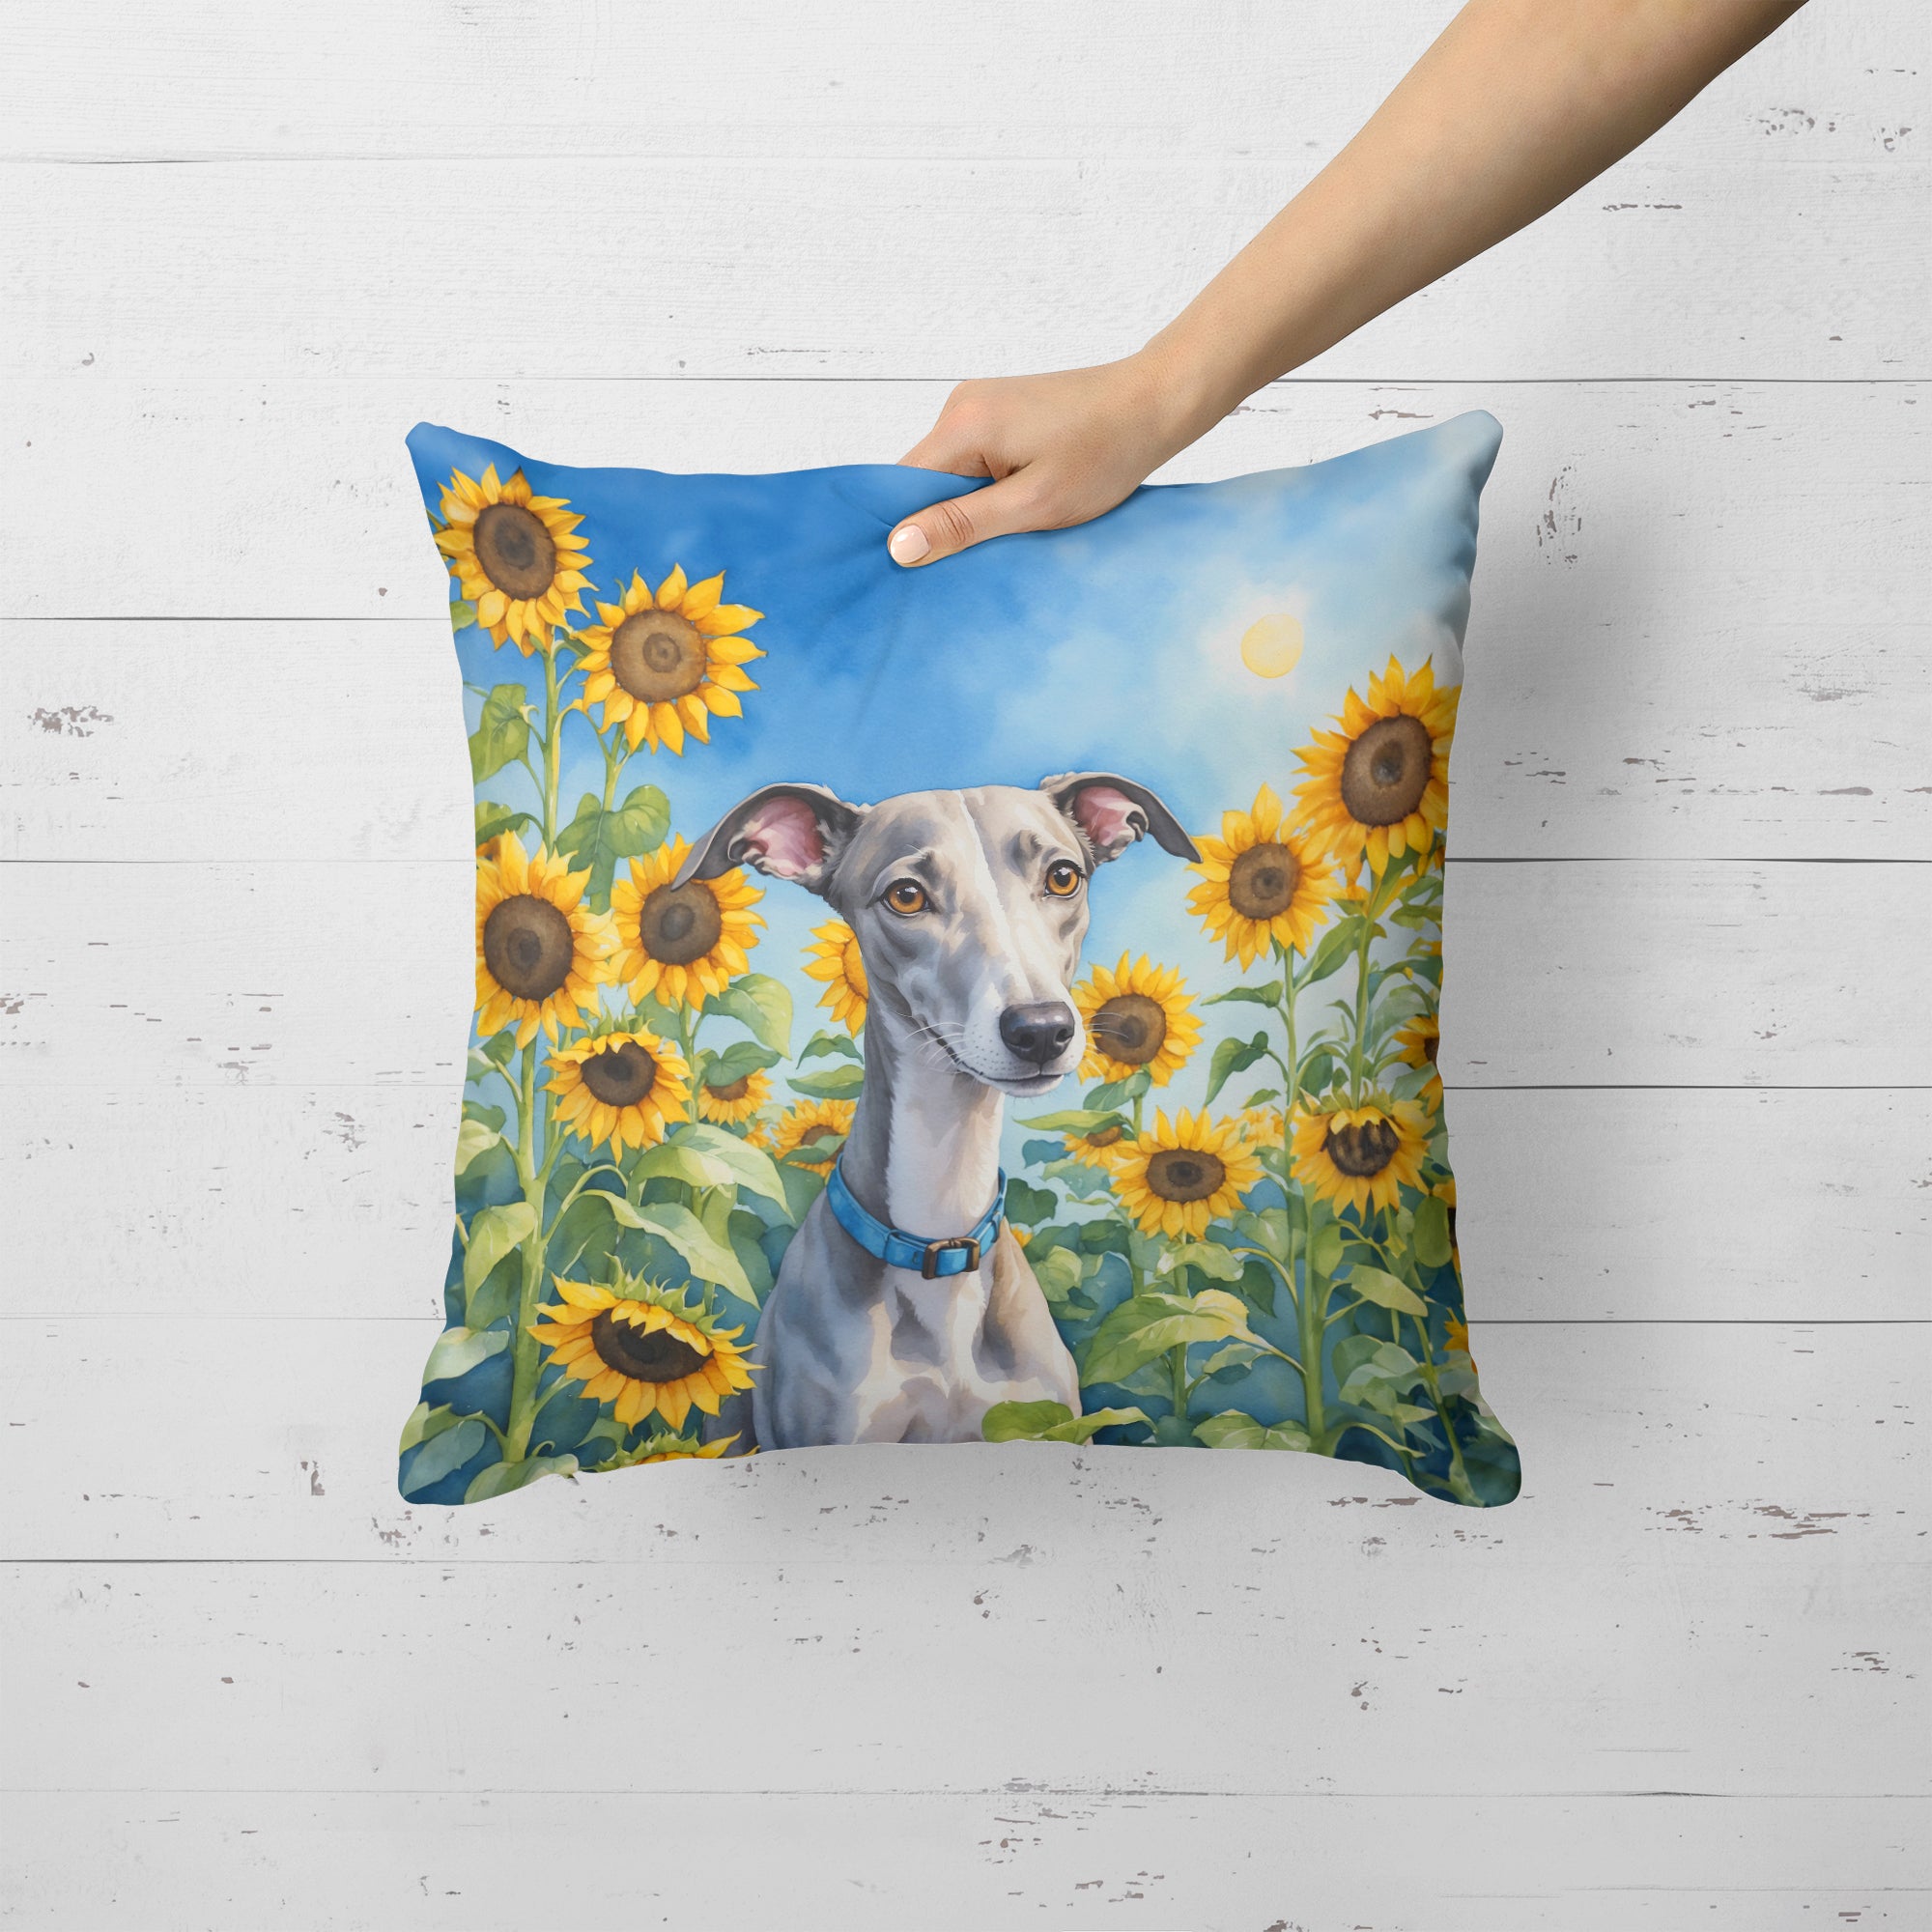 Buy this Whippet in Sunflowers Throw Pillow